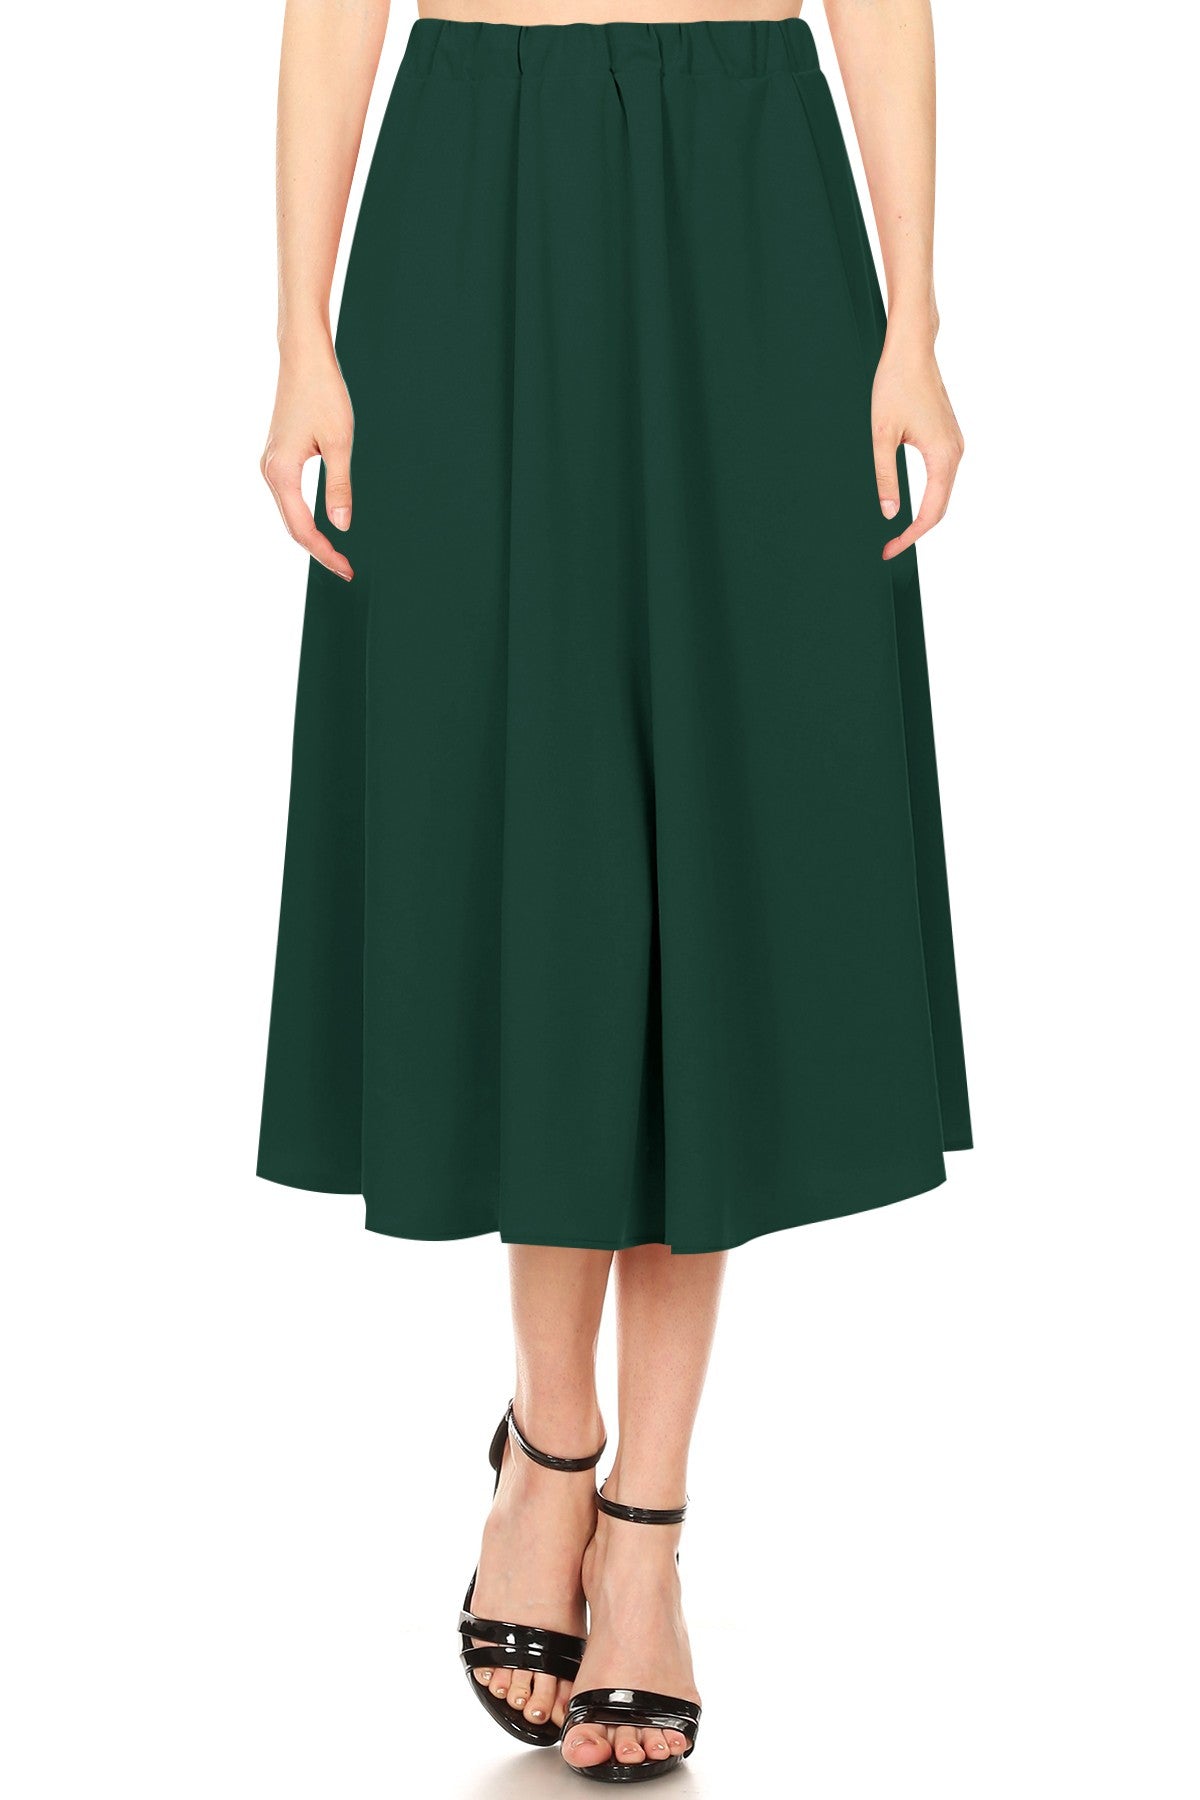 Midi Retro Skirt - Out of the Blue